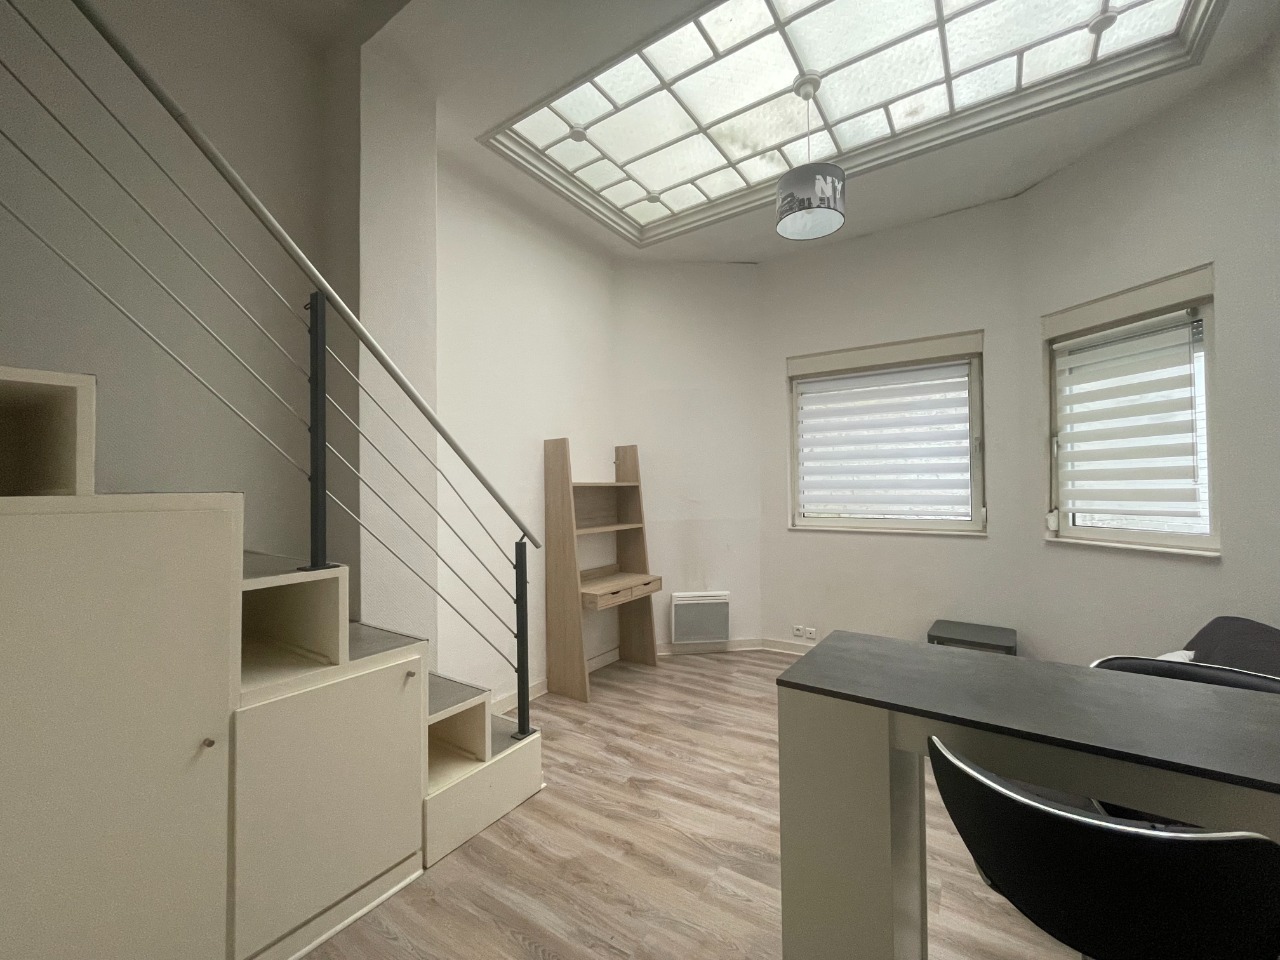 Grand studio   cour rue nationale Photo 3 - JLW Immobilier